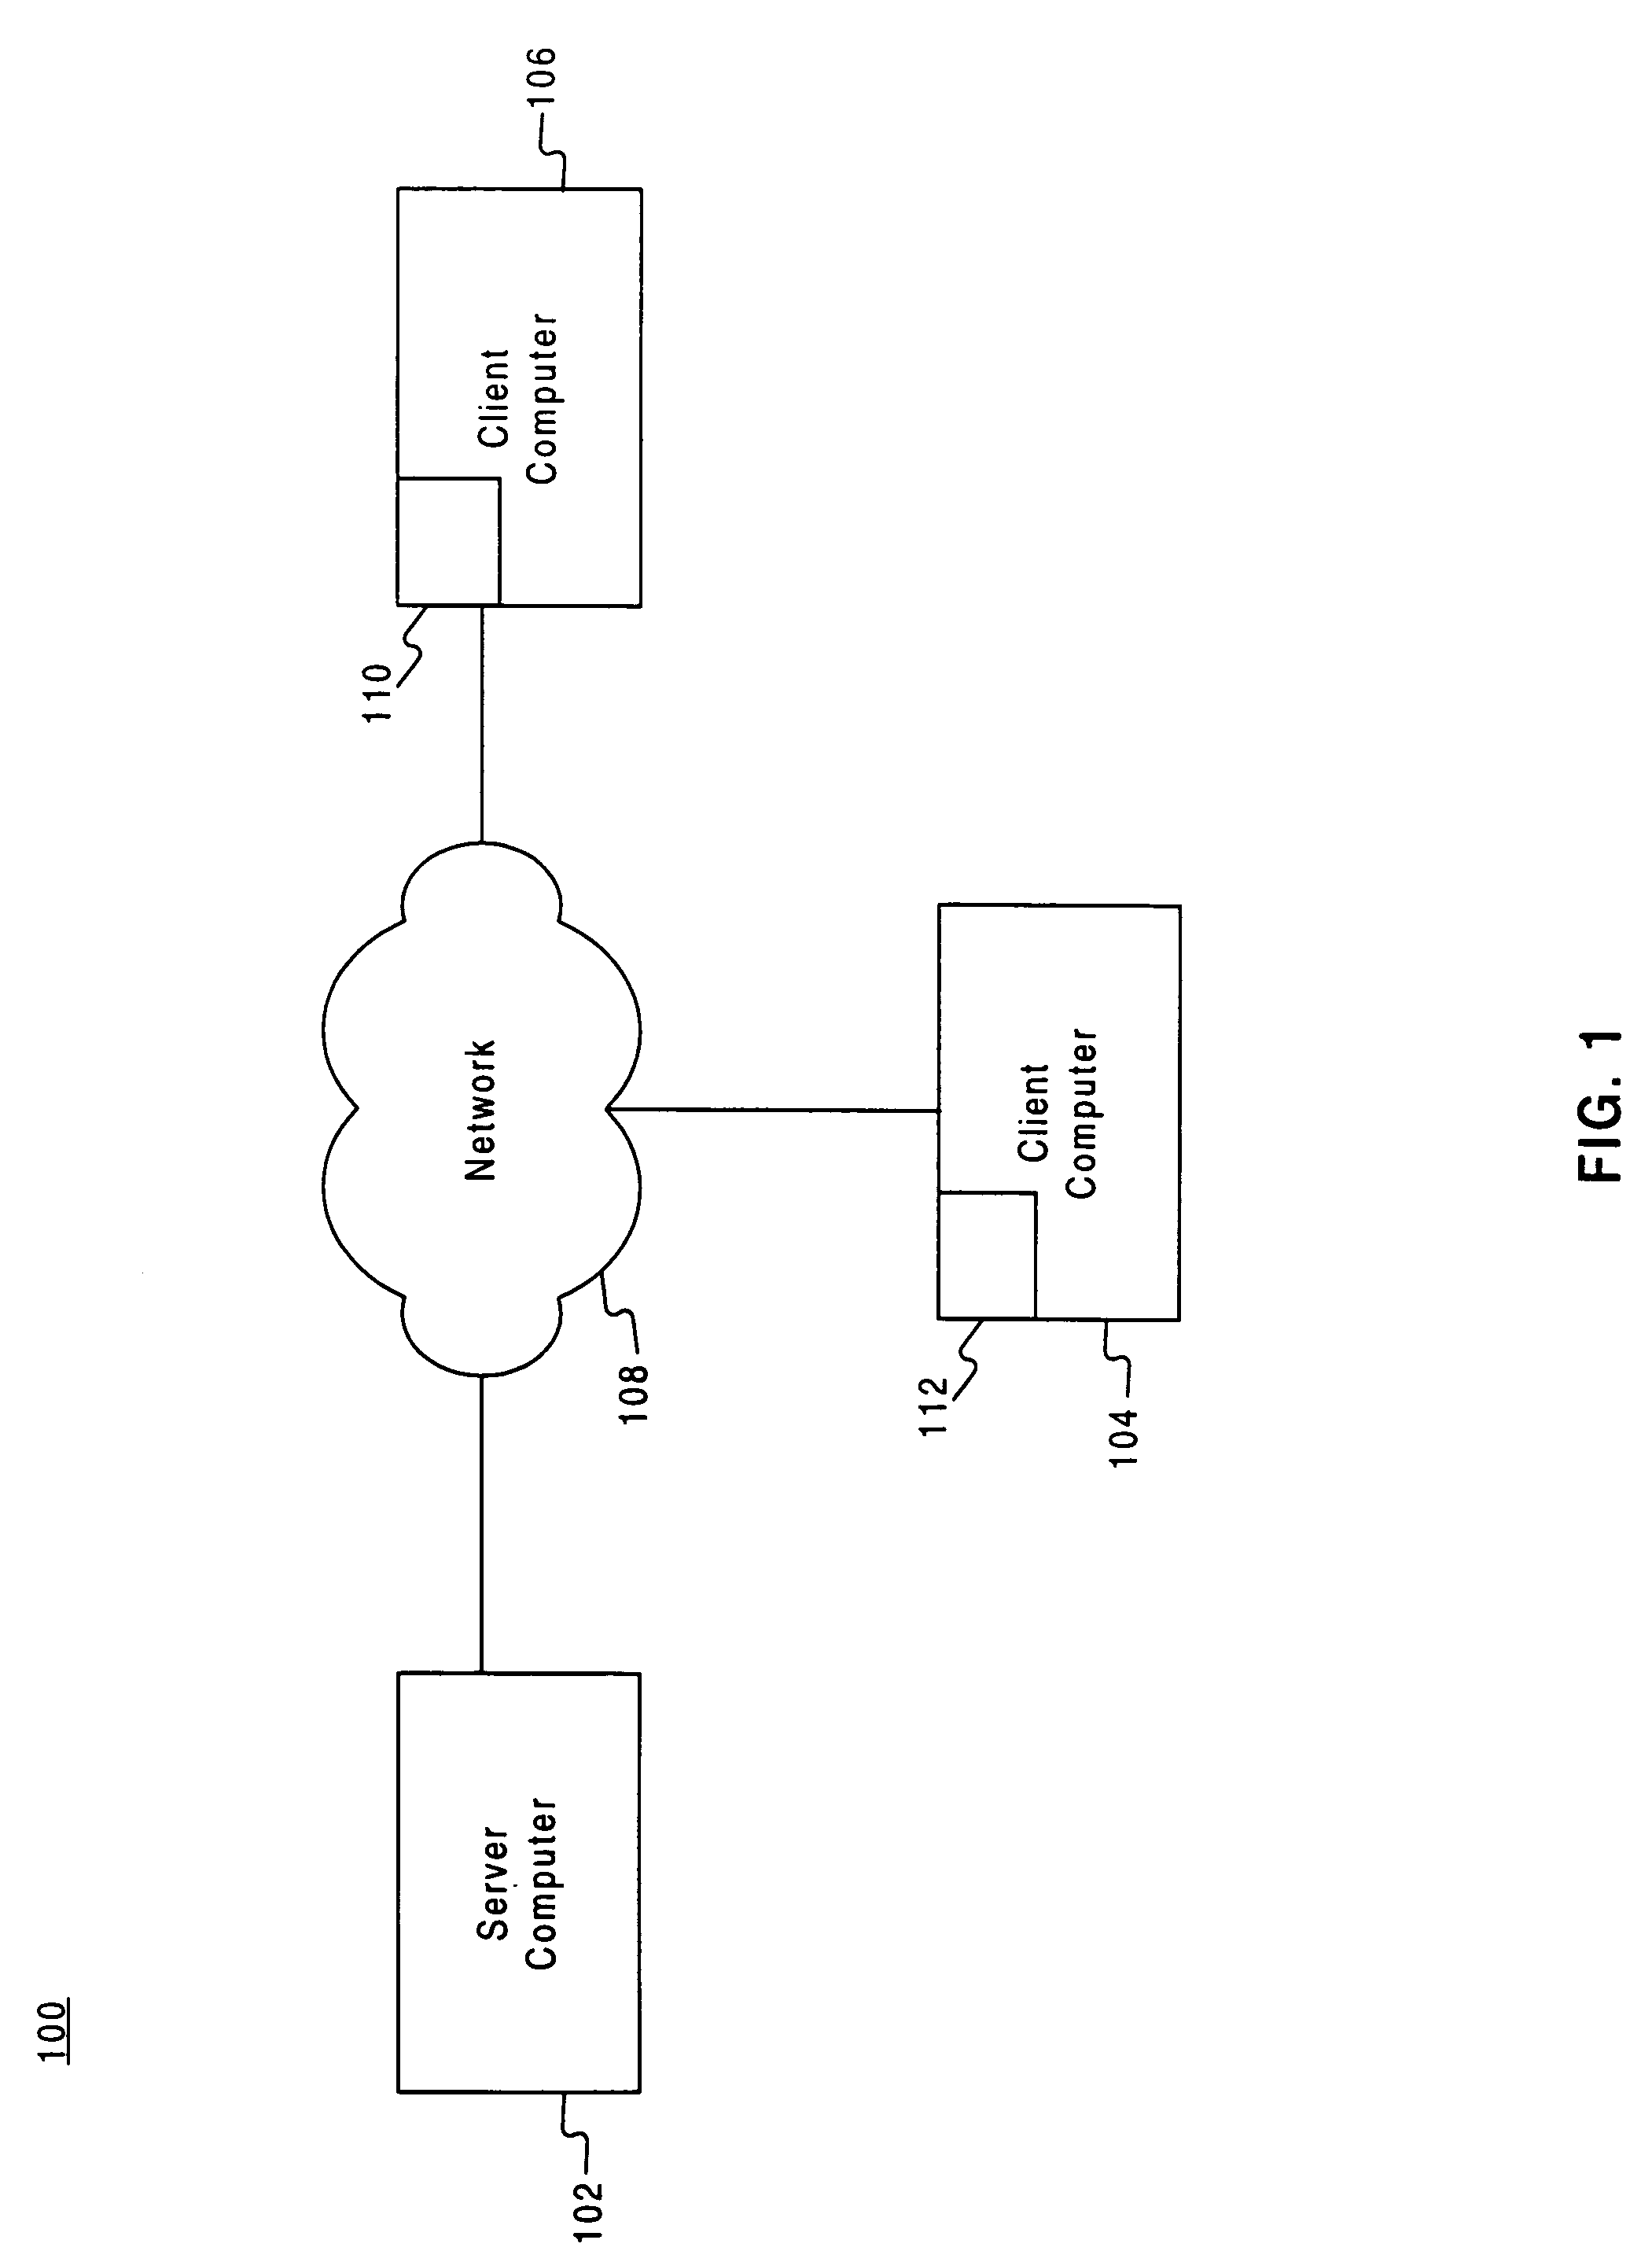 Method for evaluating activity-based costs of a company